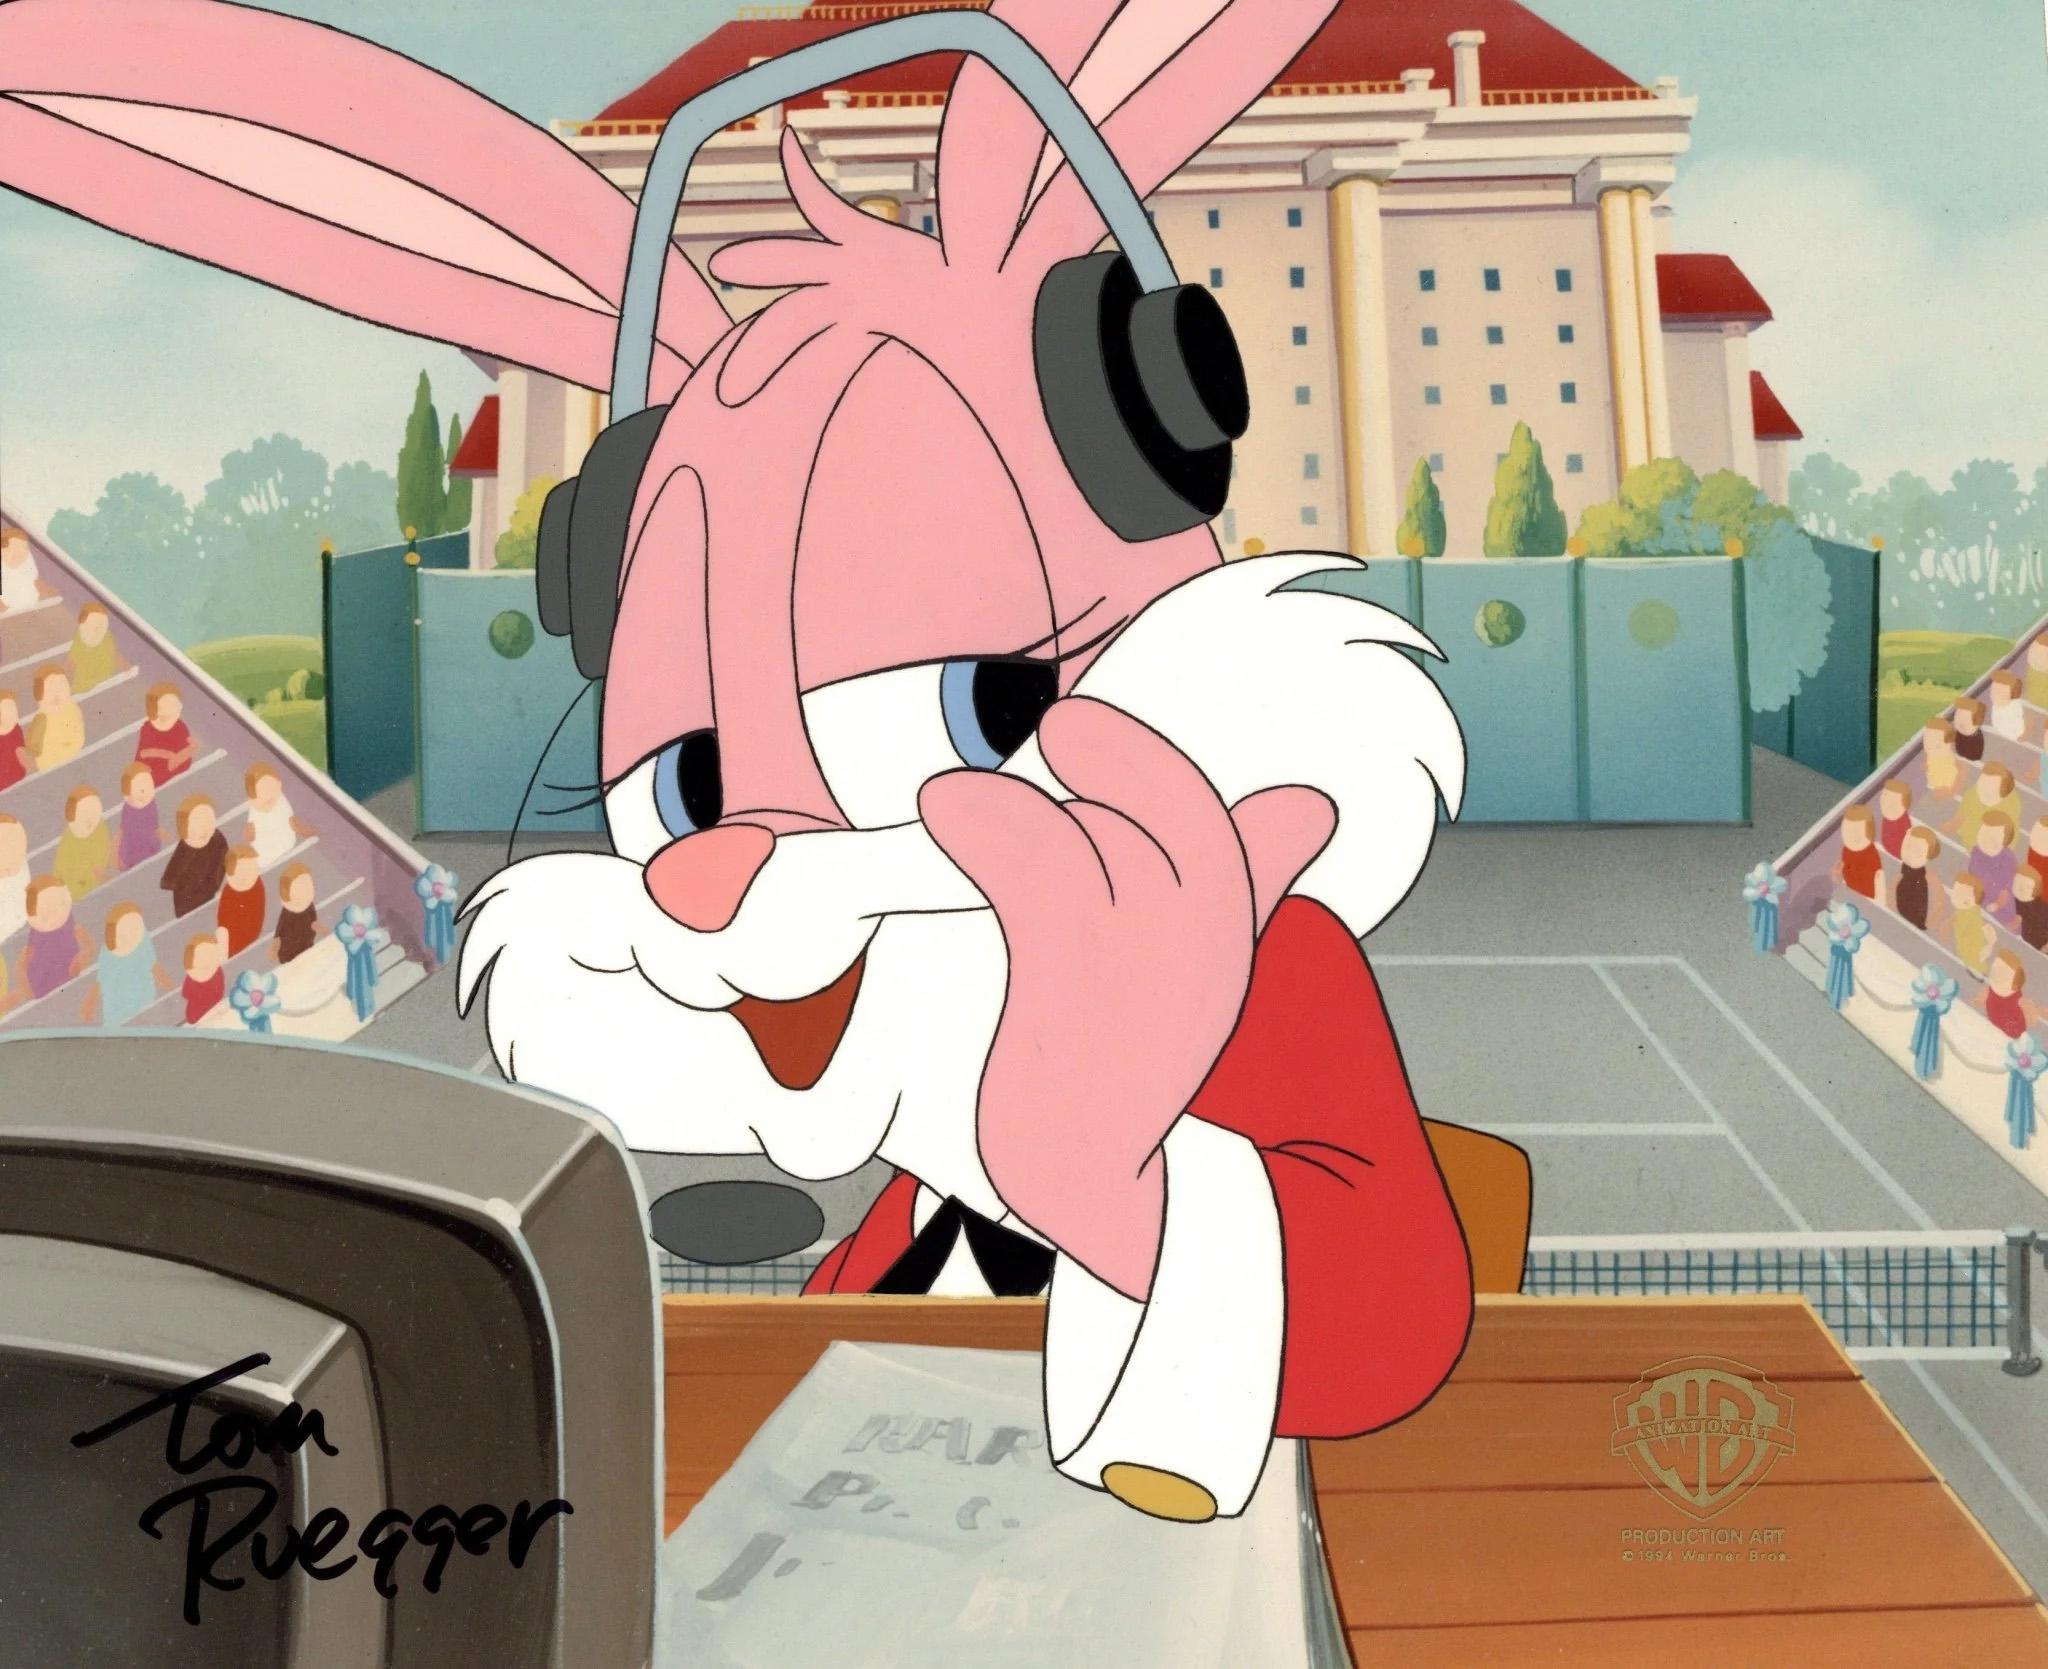 Tiny Toons Adventures Original Production Cel Signed by Tom Ruegger: Babs Bunny - Art by Warner Bros. Studio Artists